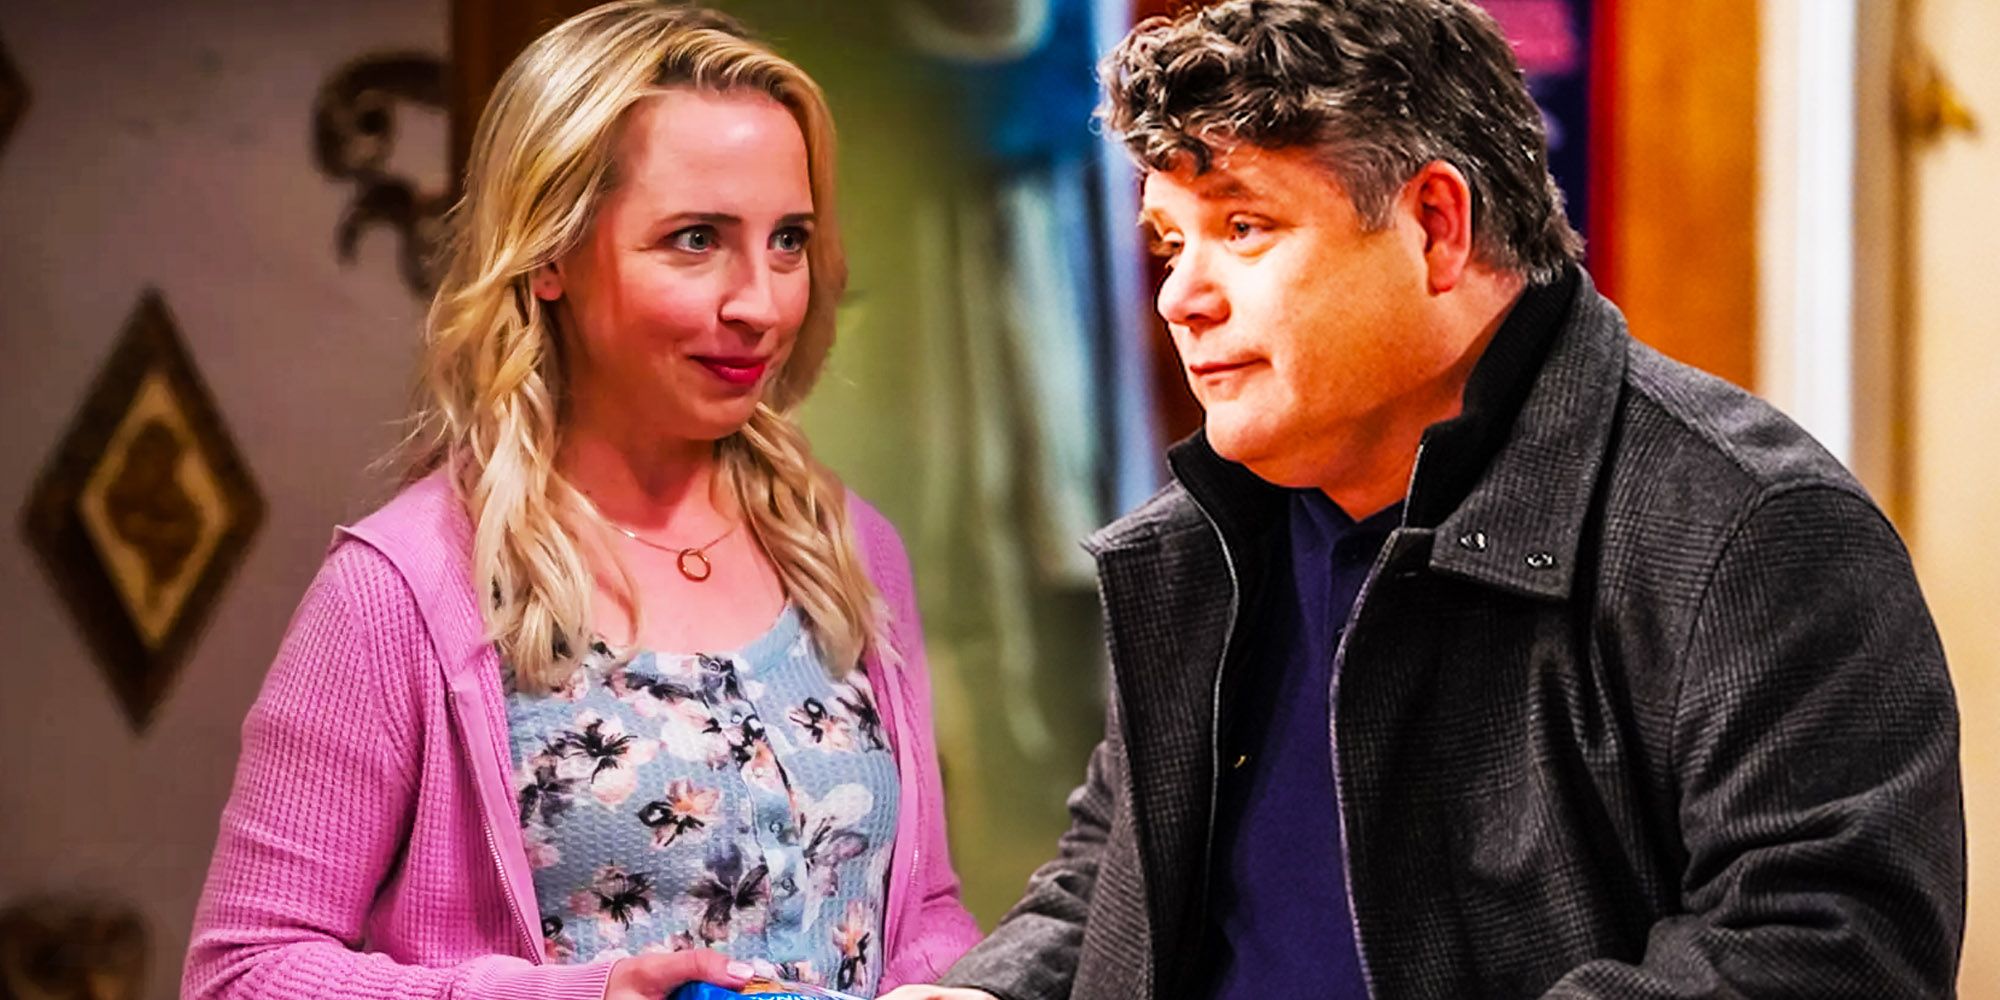 Custom image of Lcy Goranson's Becky and Sean Astin's Tyler on The Conners